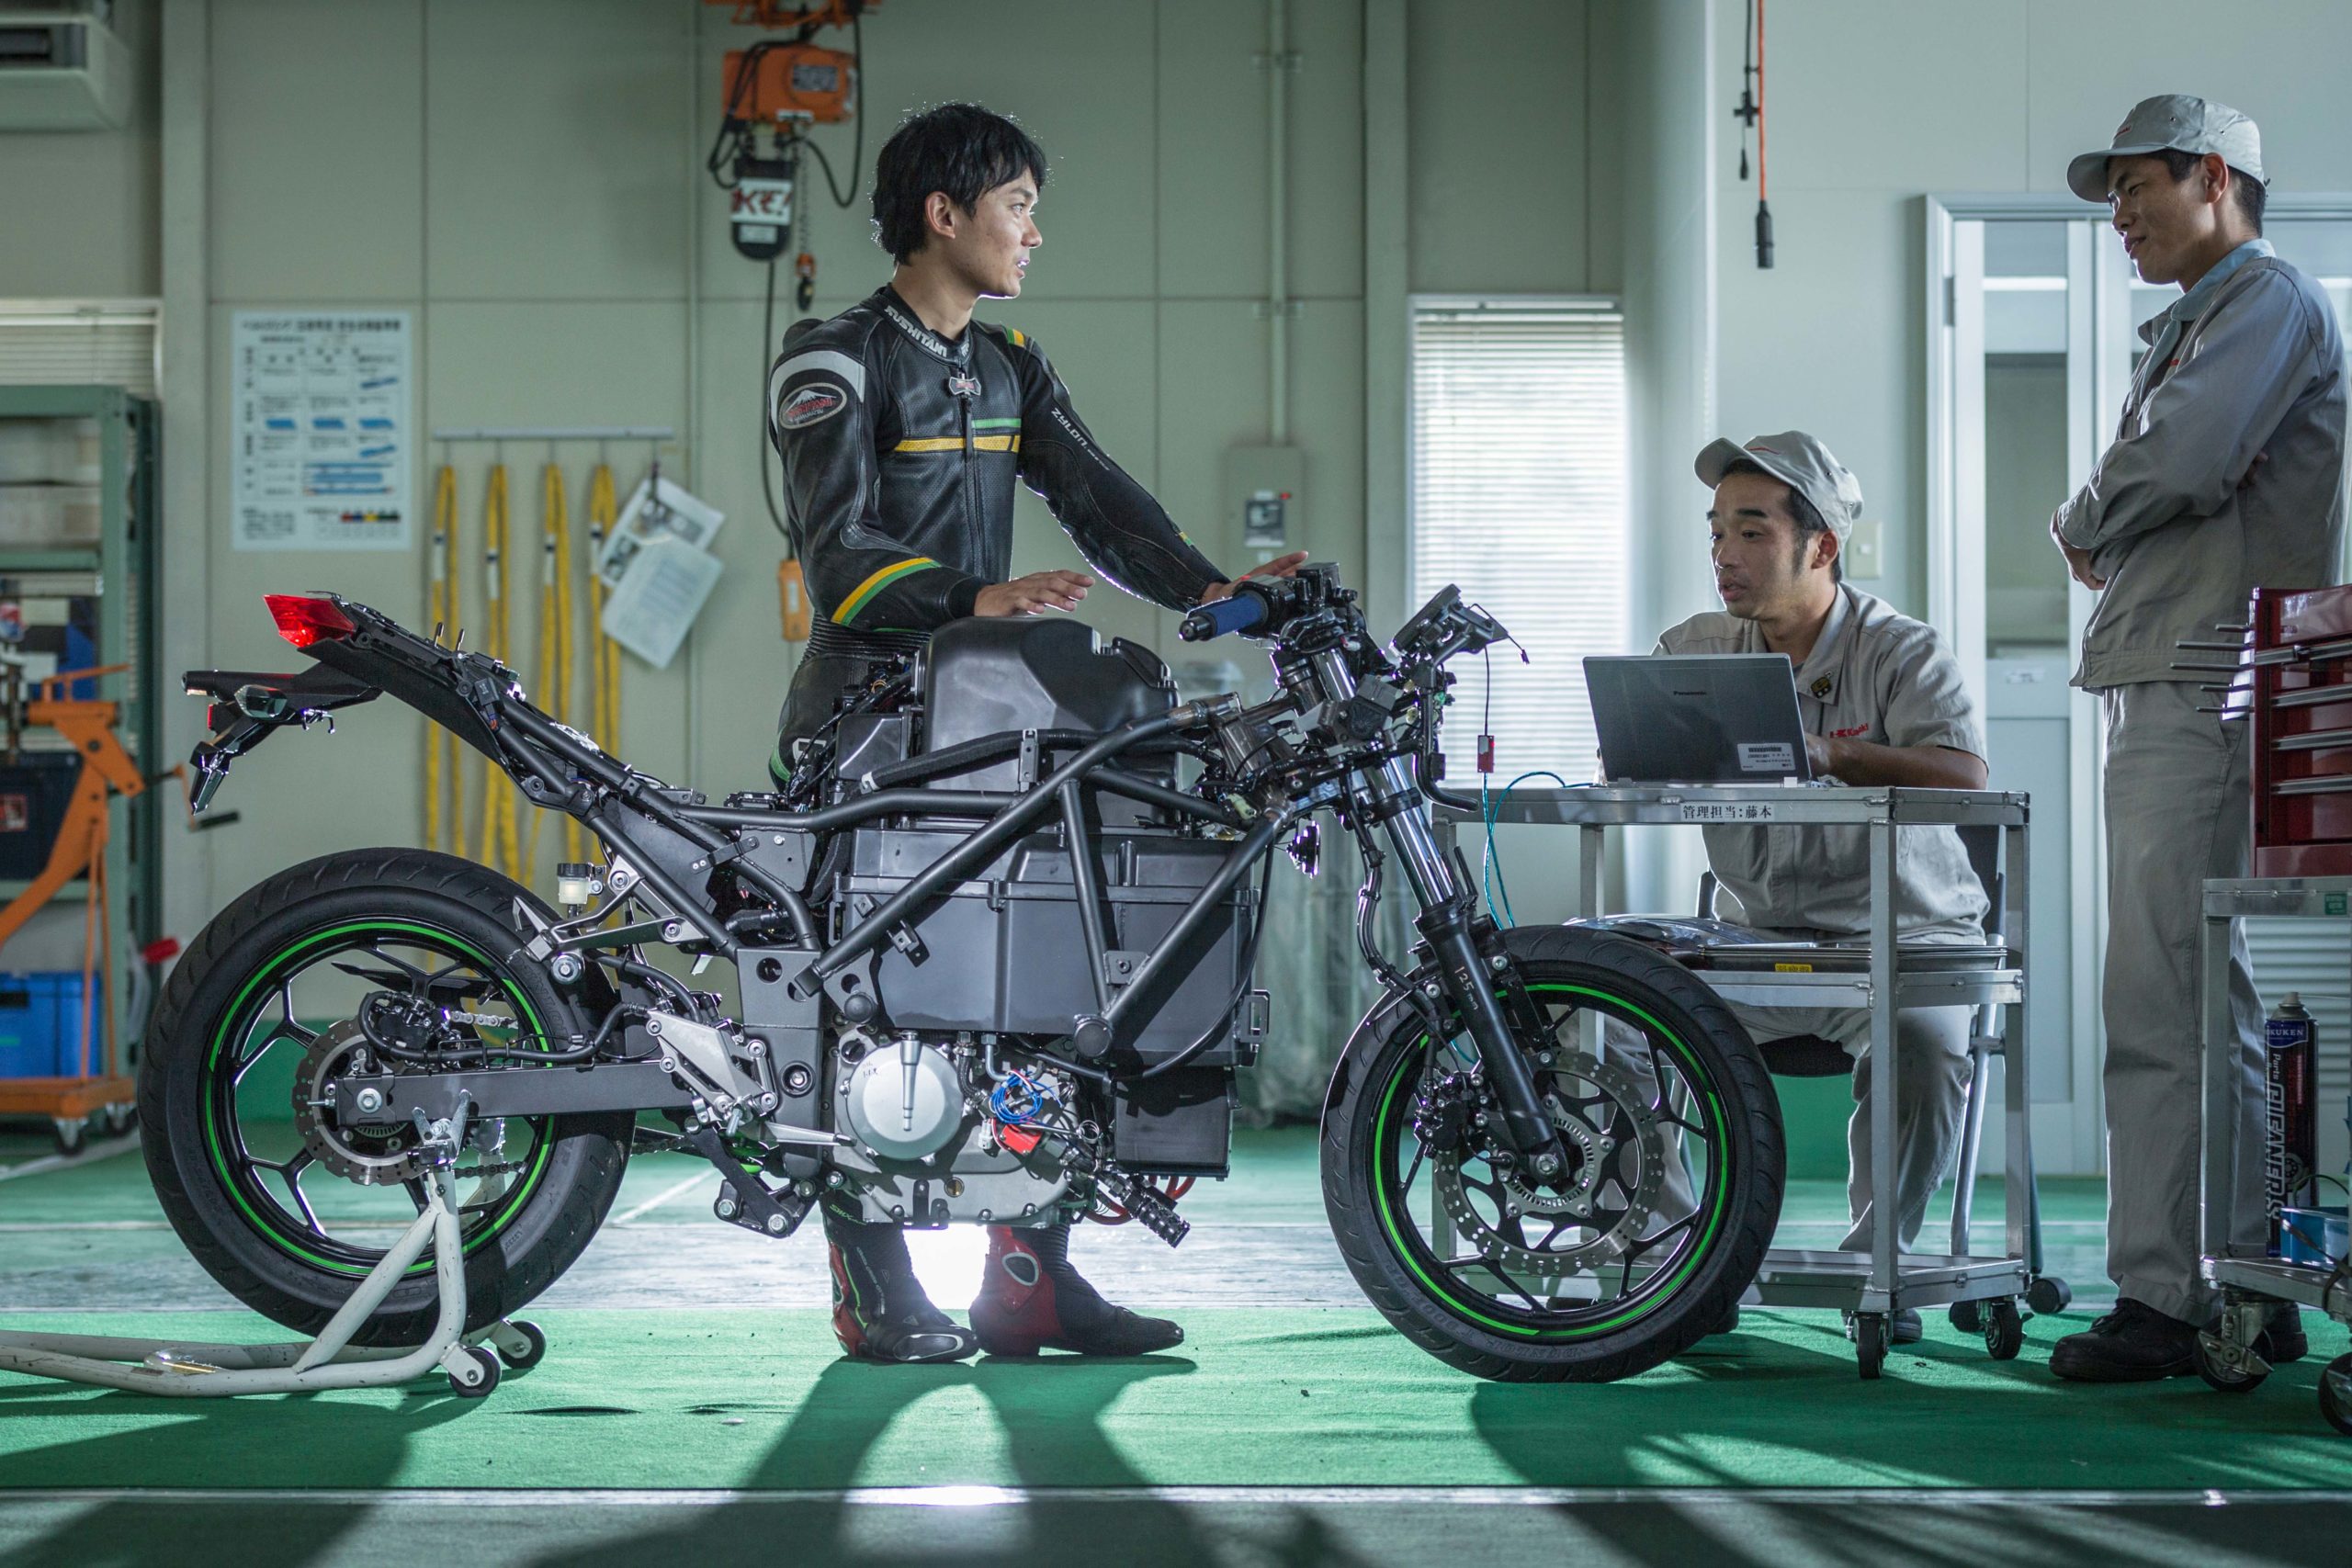 A view of the new supercharged hybrid motorcycle that Kawasaki has been working on